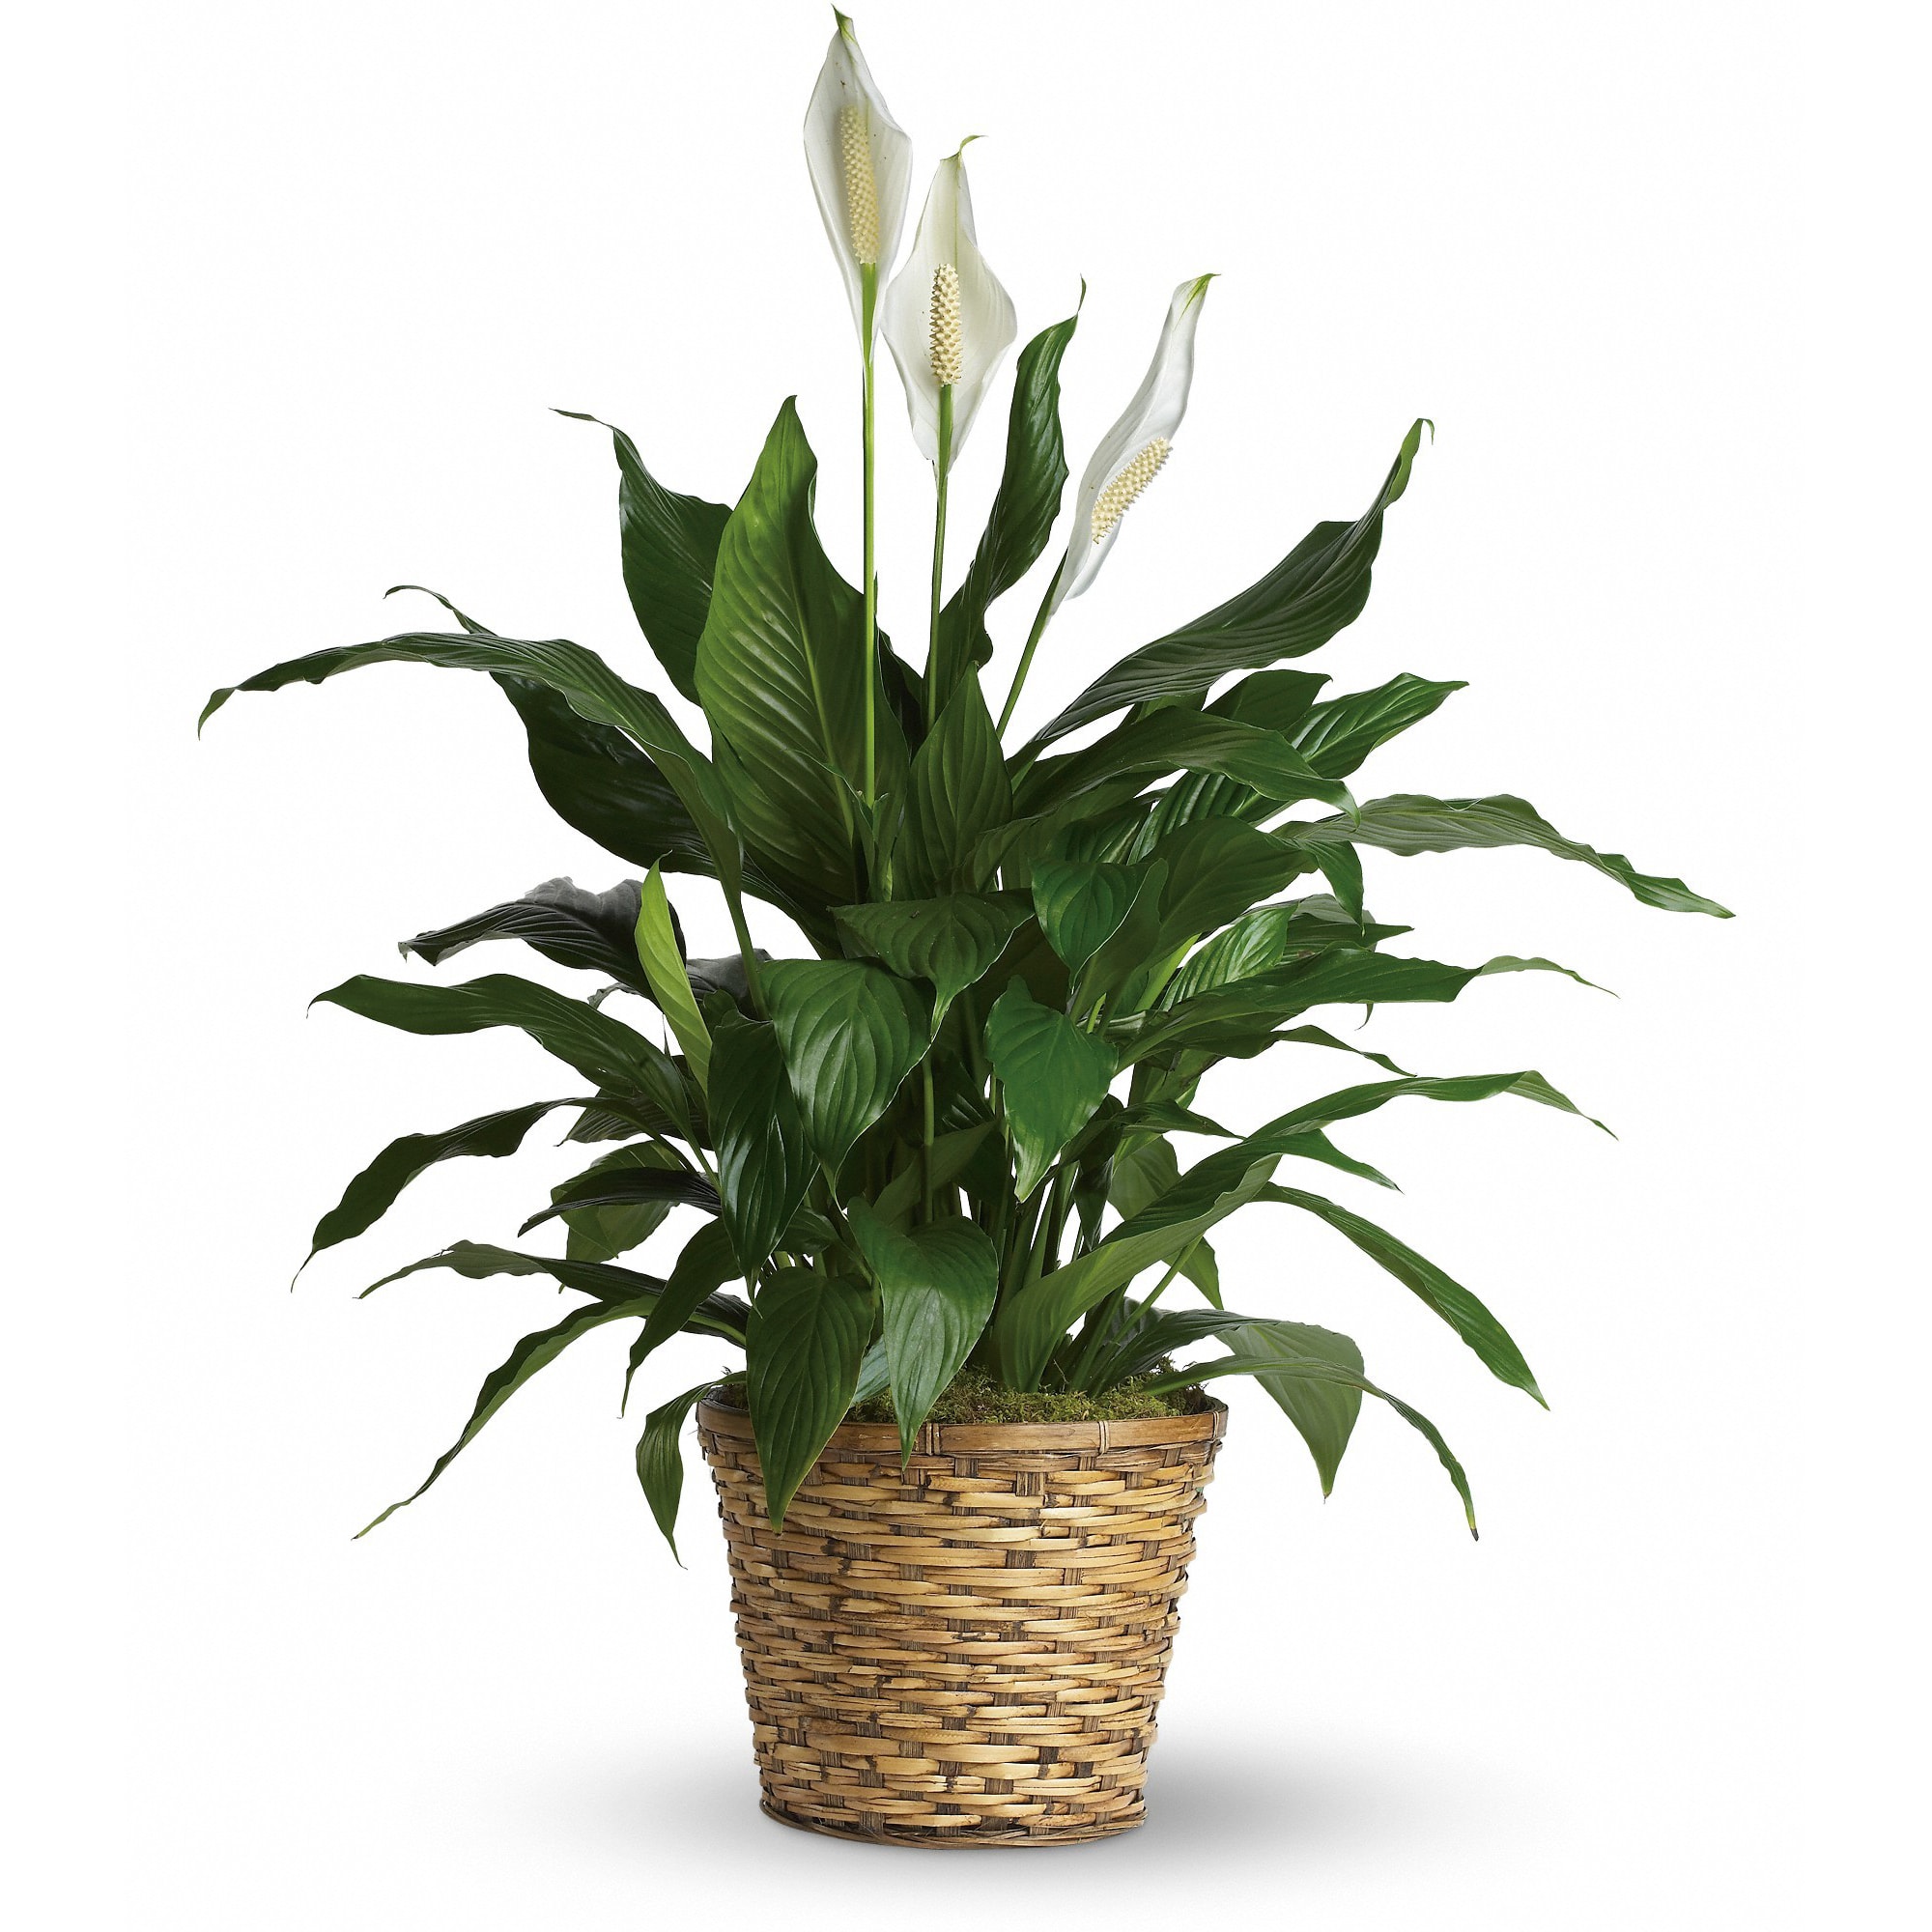 Simply Elegant Spathiphyllum - Medium - Known for its indoor beauty and ability to clear the air of contaminants, this brilliant green plant with dazzling white blossoms makes a perfect gift for almost any occasion. low-maintenance. High quality. Bet you never knew delivering elegance could be this simple.  This spathiphyllum comes in an 8&quot; woven wicker basket. It's a great medium for delivering vitality.  Approximately 30 1/2&quot; W x 37&quot; H  Orientation: N/A  As Shown : T105-2A